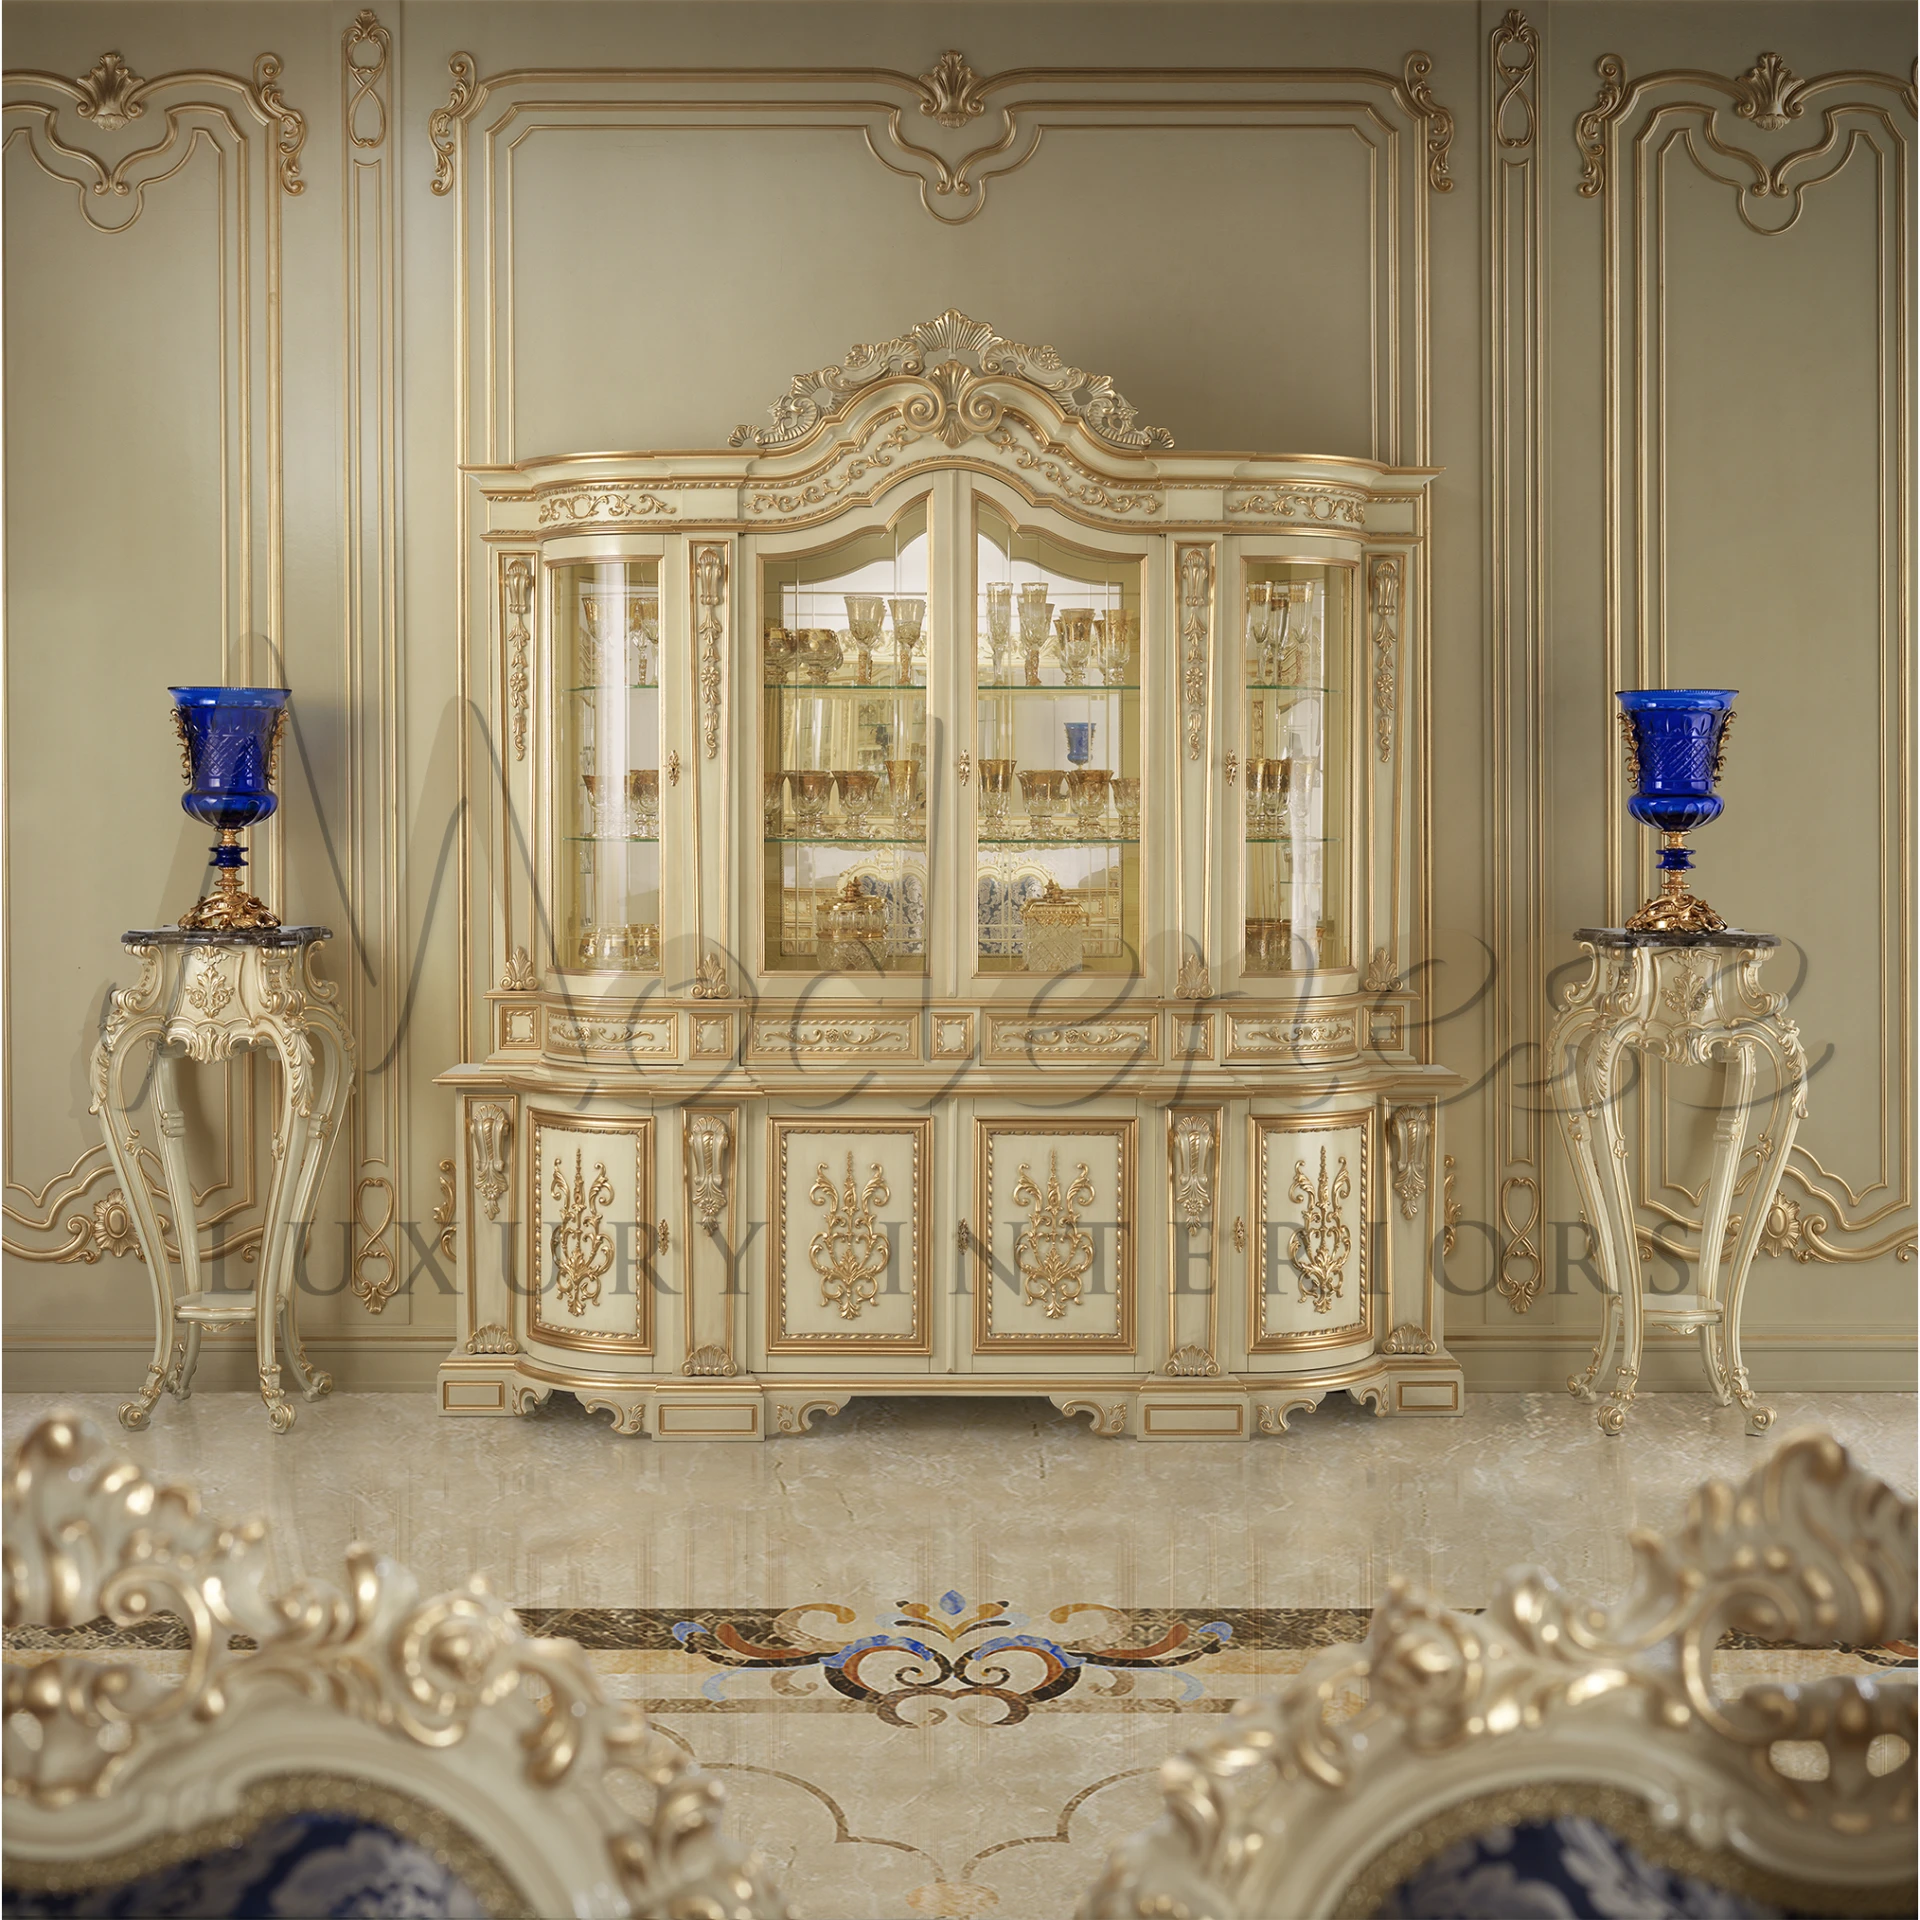 Fancy ivory cabinet with glass doors flanked by tall blue vases on stands